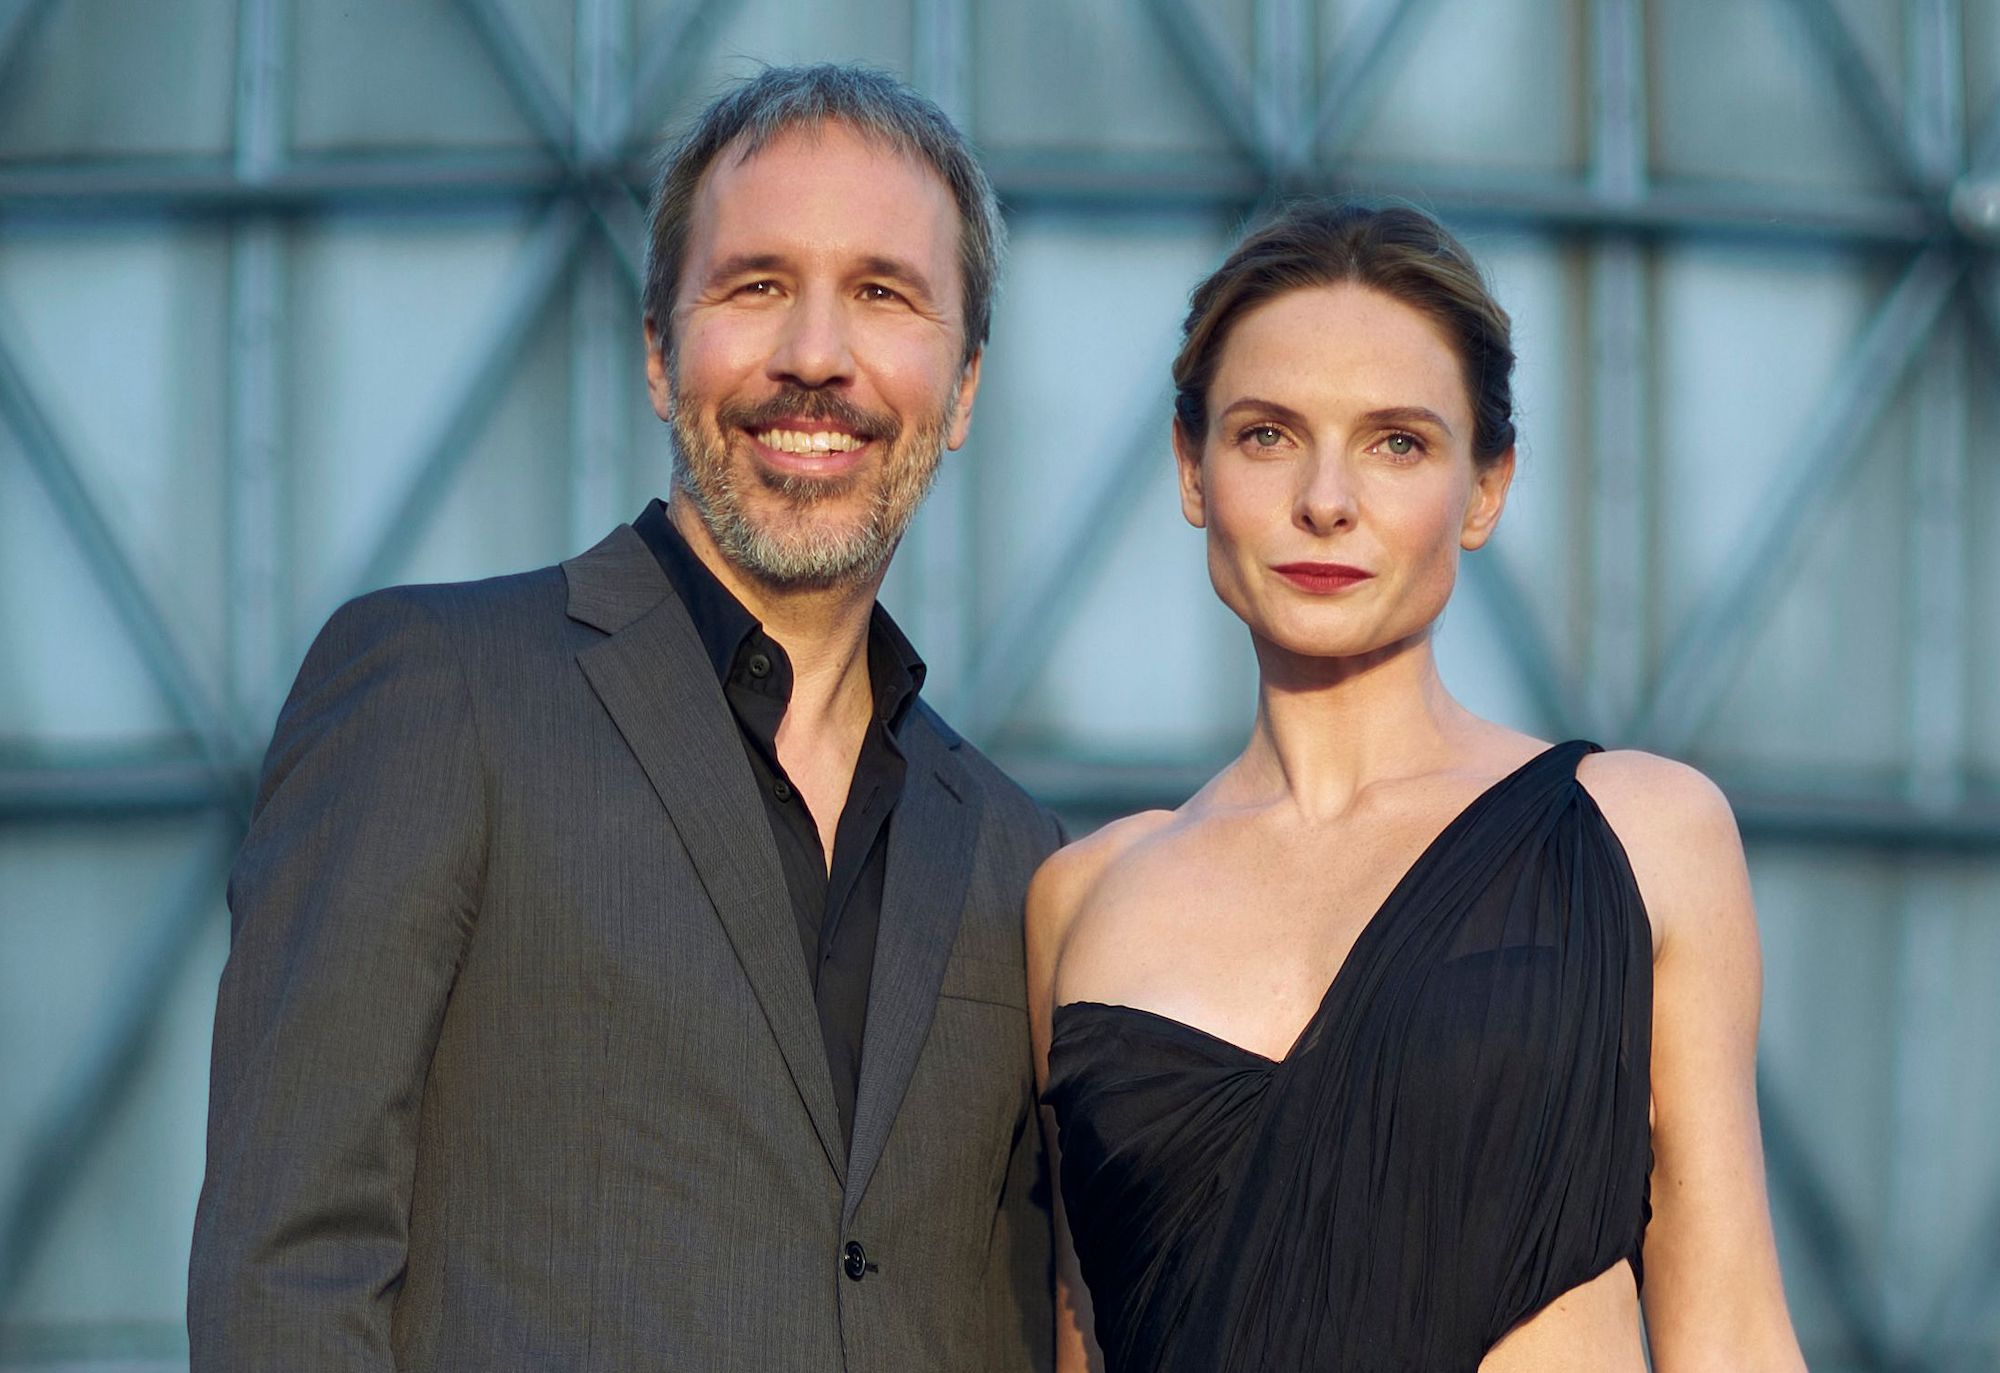 'Dune' director Denis Villeneuve and Rebecca Ferguson at the 'Dune' premiere at the Toronto International Film Festival in Toronto, Ontario, Sept. 11, 2021. They stand outside in front of a geometric backdrop. Villeneuve (L) wears a black shirt and grey suit. Ferguson (R) wears a black dress with one twisted strap on her left shoulder.